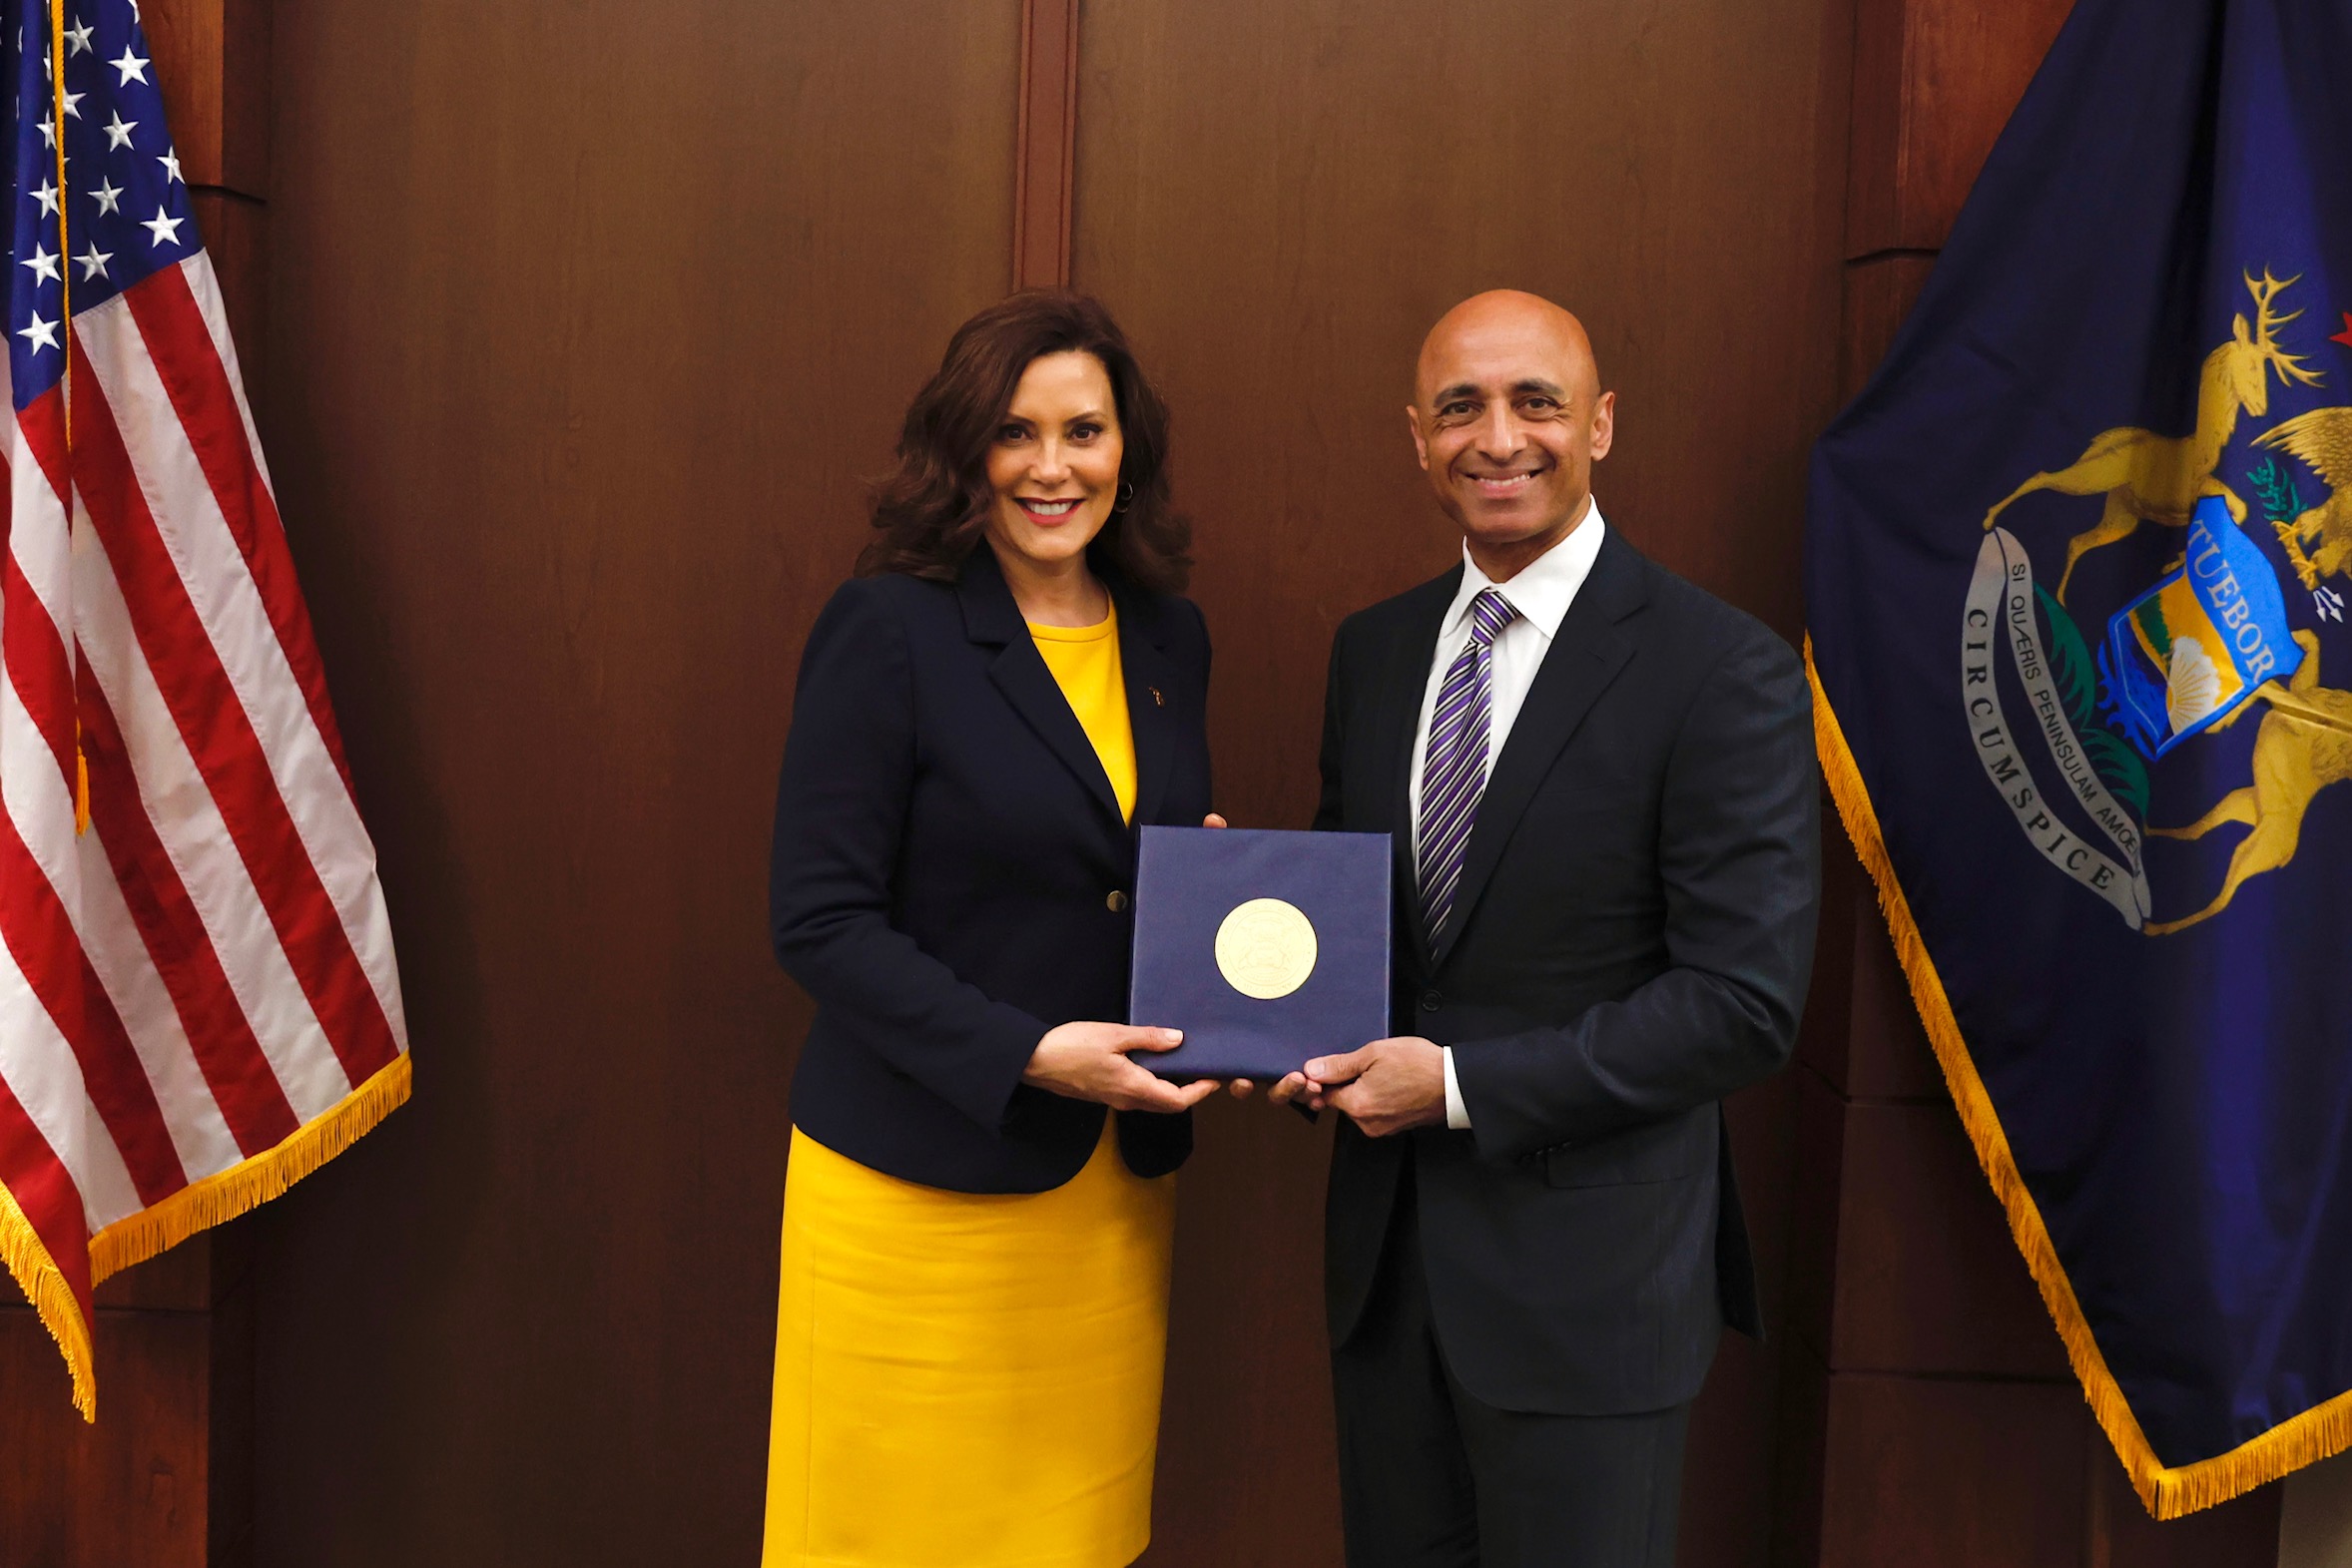 Yousef Al Otaiba meets with Governor of Michigan Gretchen Whitmer.